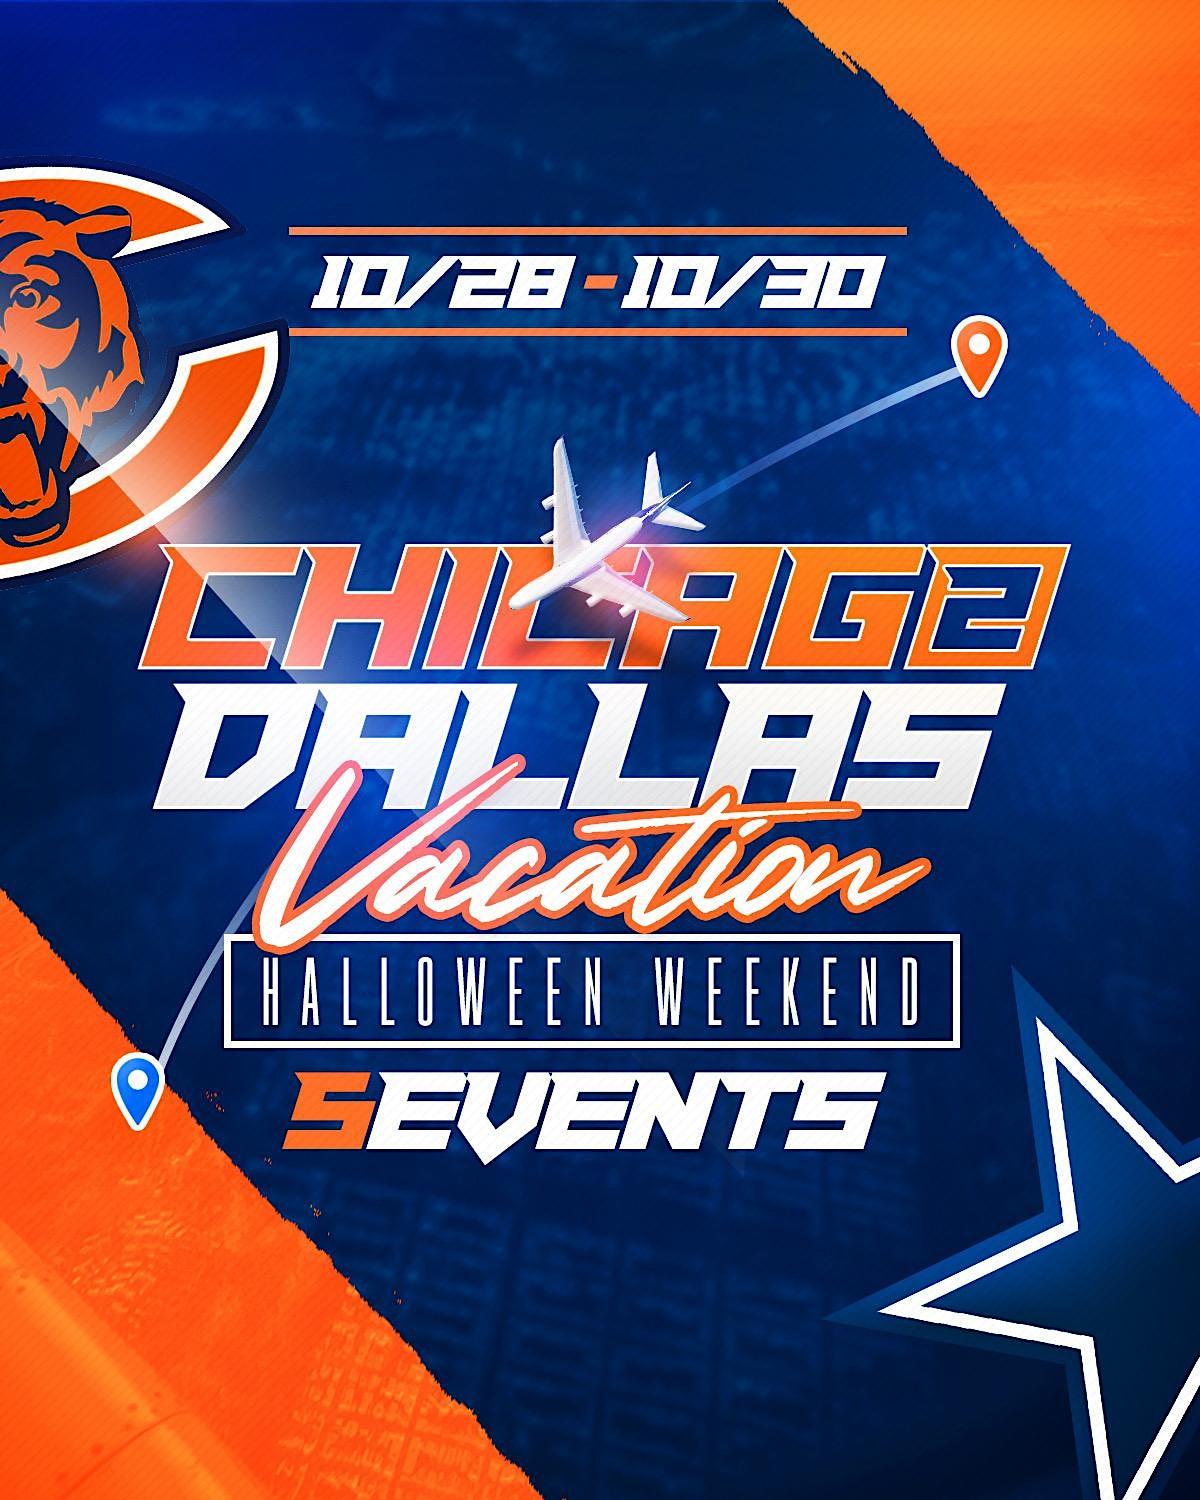 Official Chicago To Dallas Event Line Up! Bears Vs Cowboys! Halloween WKND!
Fri Oct 28, 8:00 PM - Mon Oct 31, 3:00 AM
in 7 days